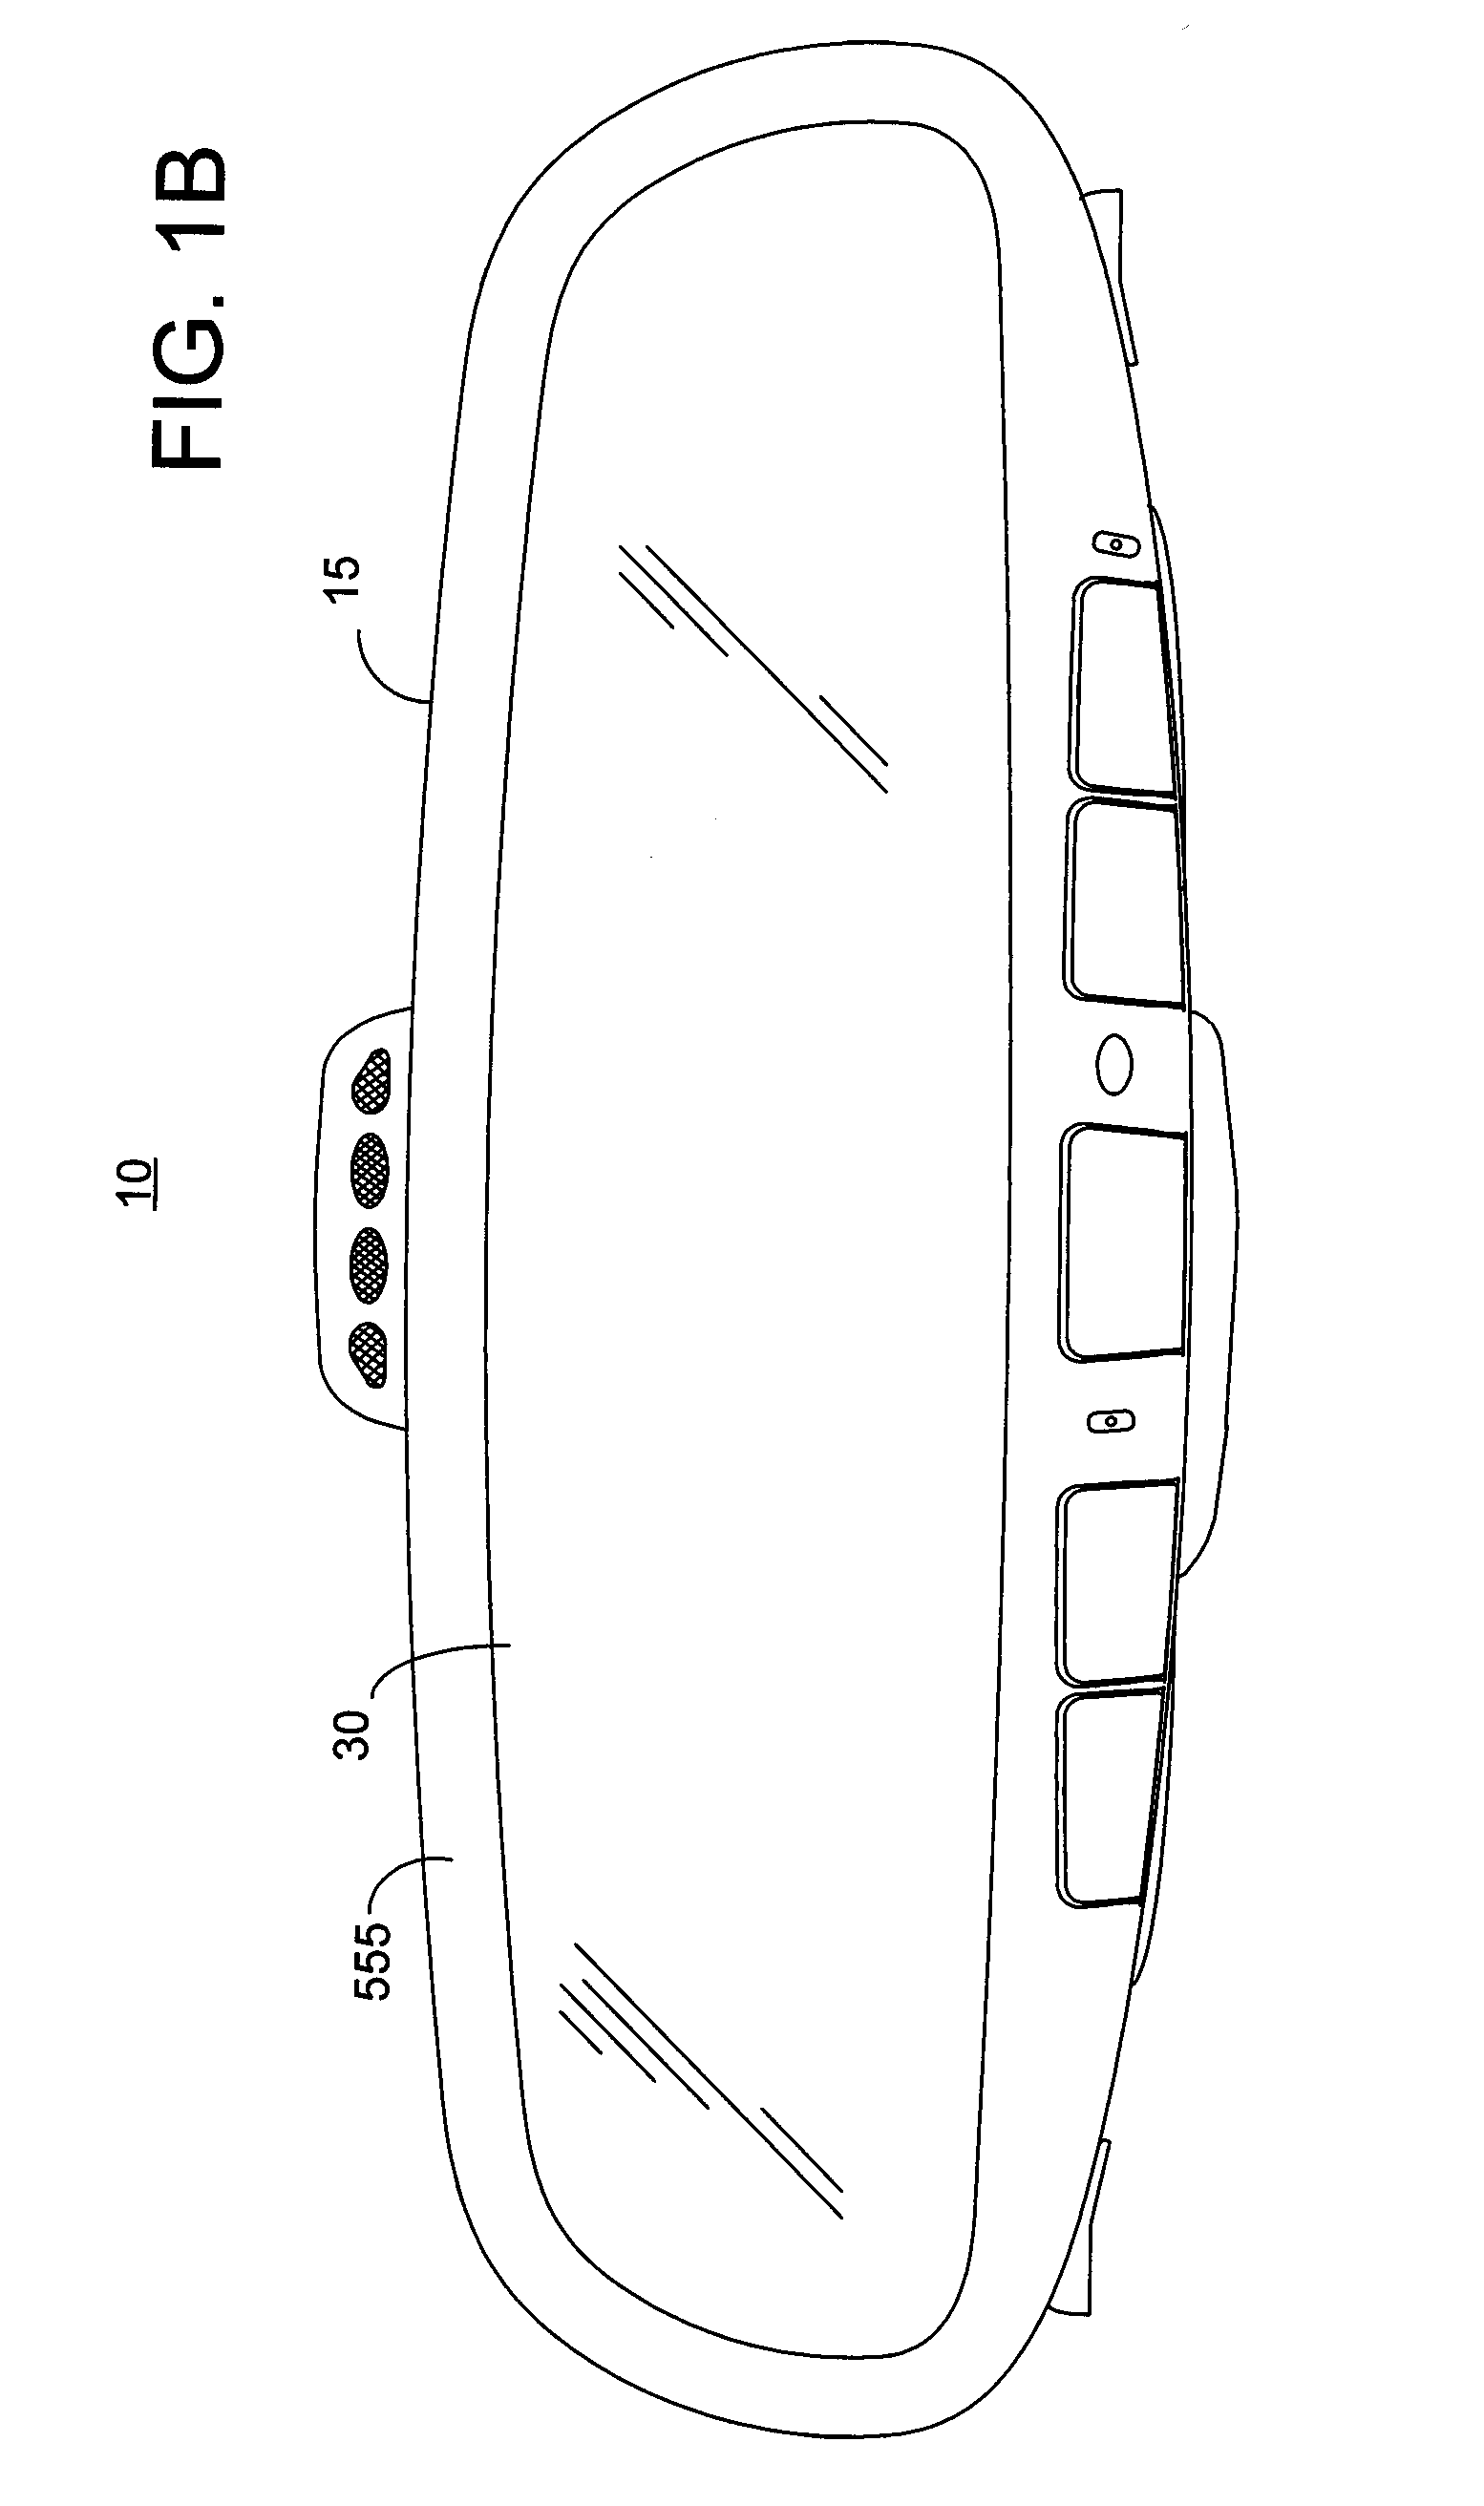 Vehicle Rearview Mirror Assembly Including a High Intensity Display